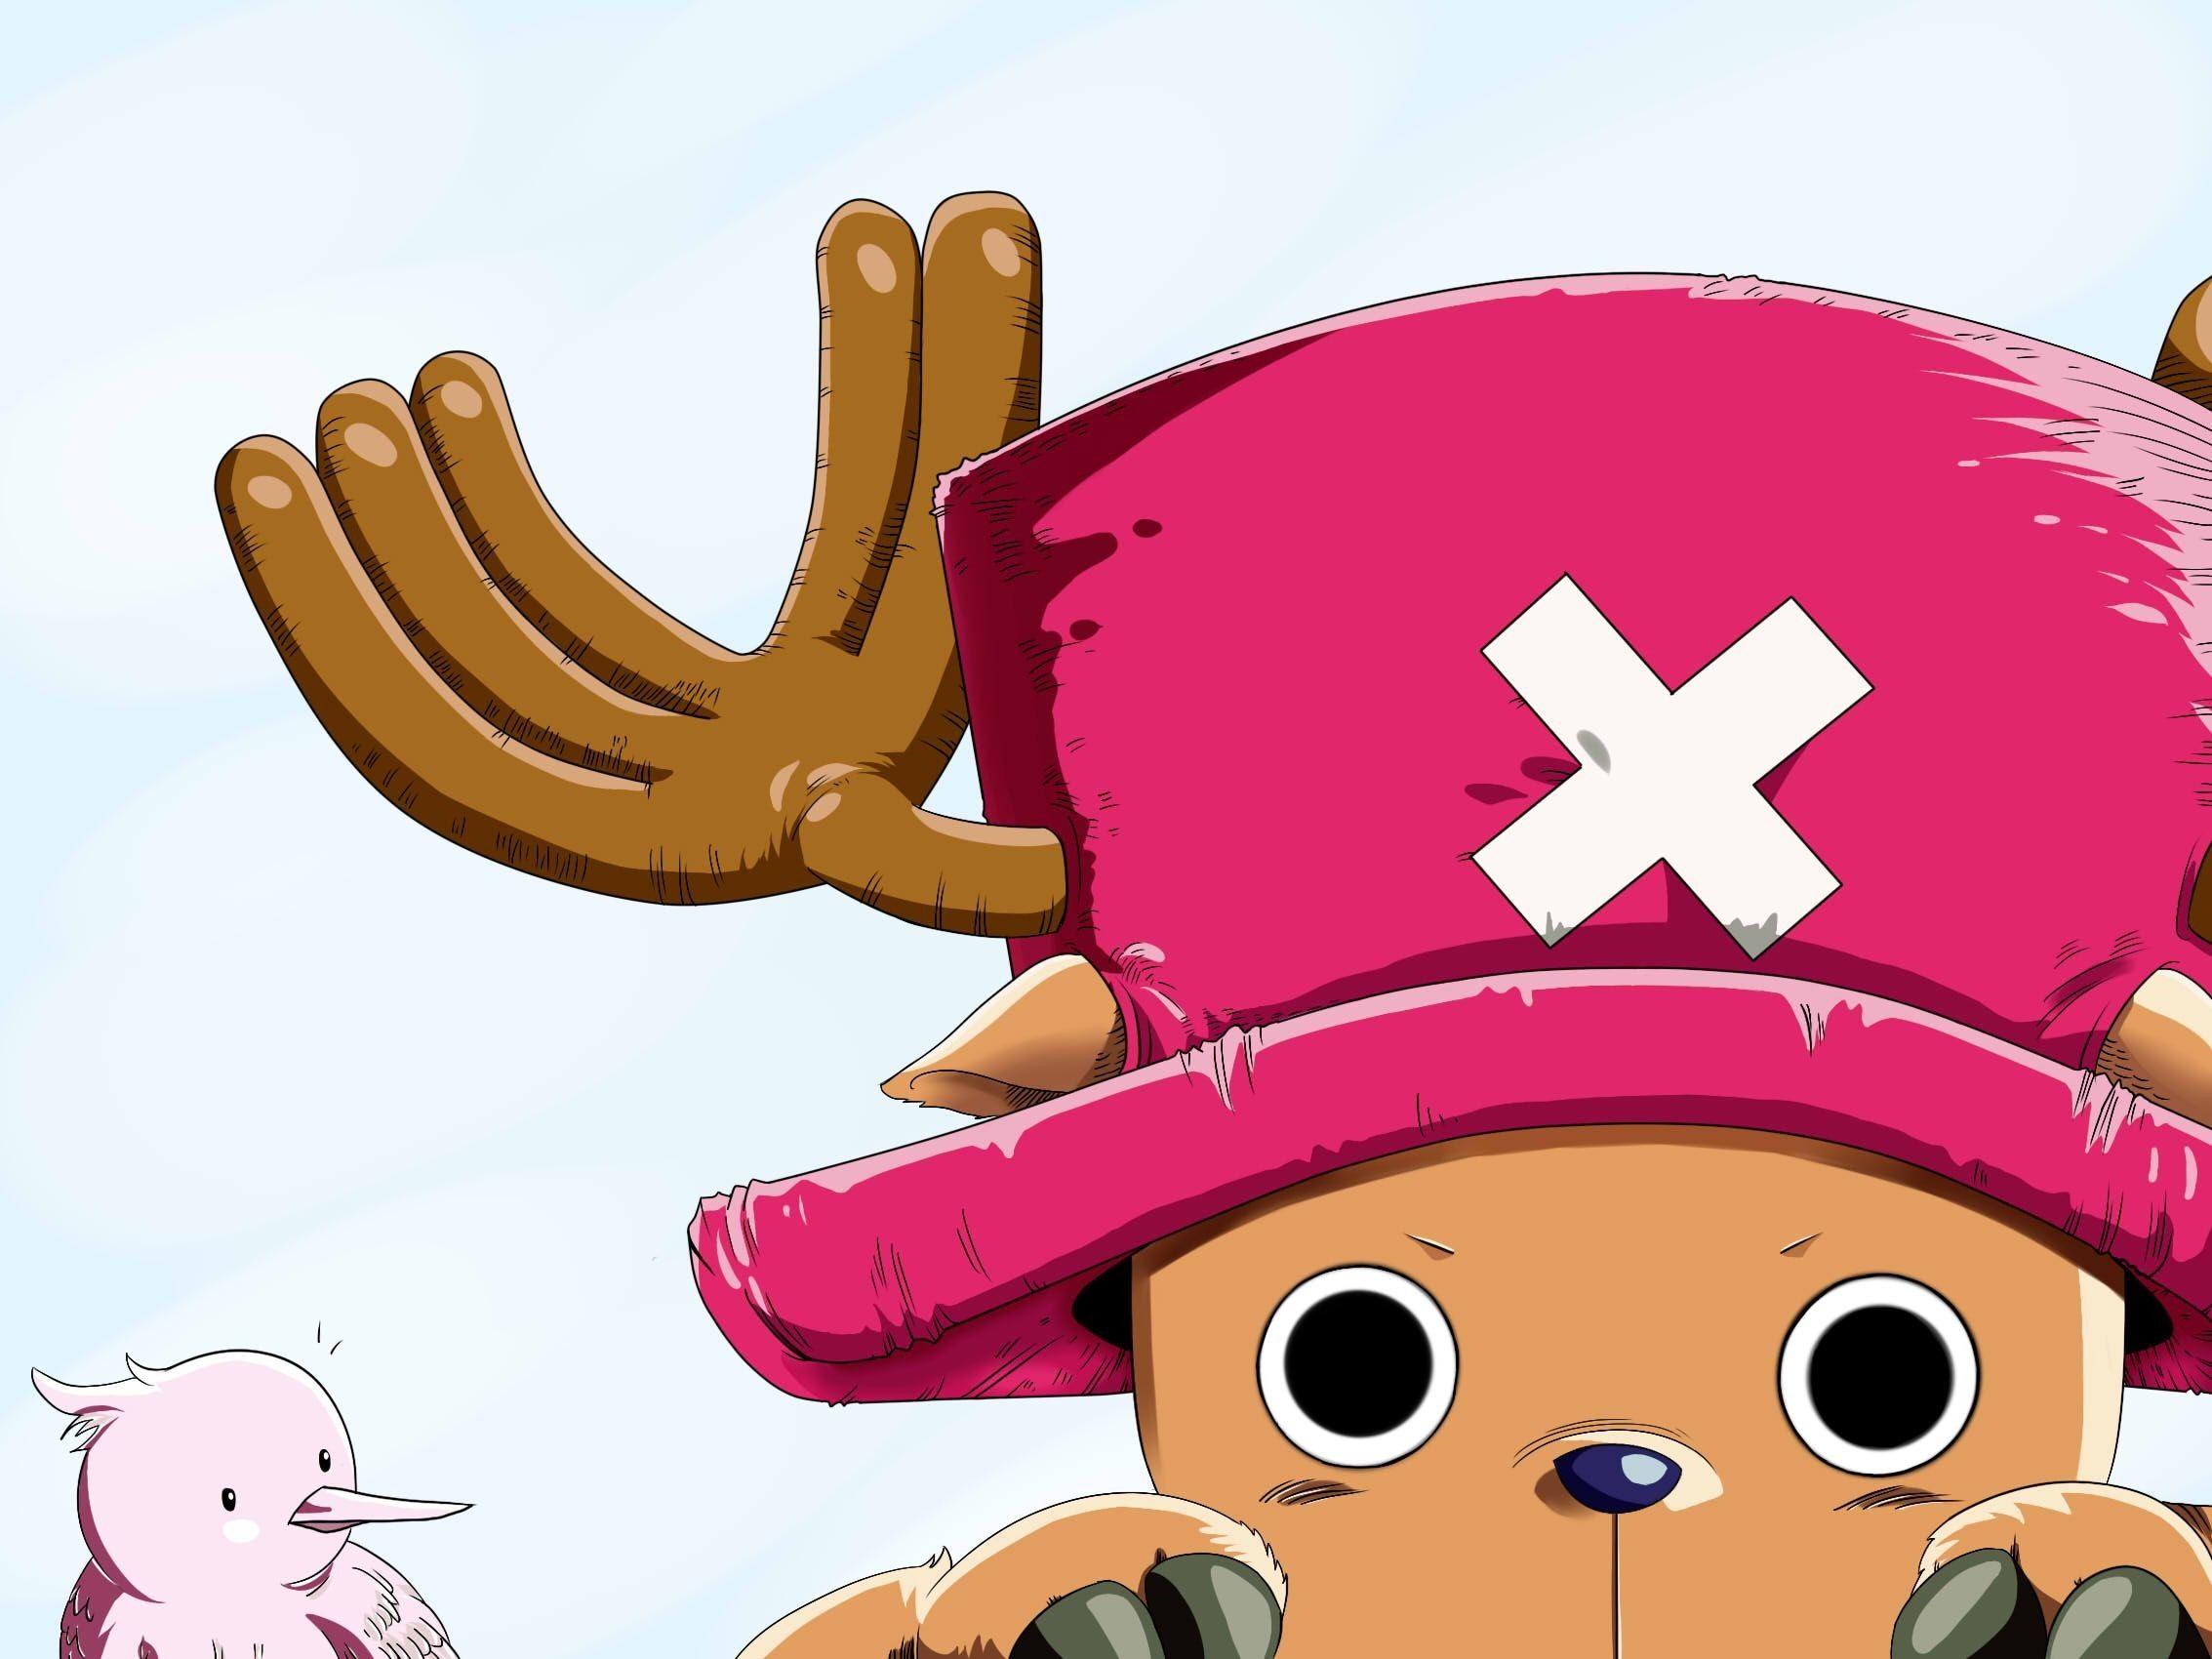 Chopper Wallpaper For Pc, One Piece, Anime